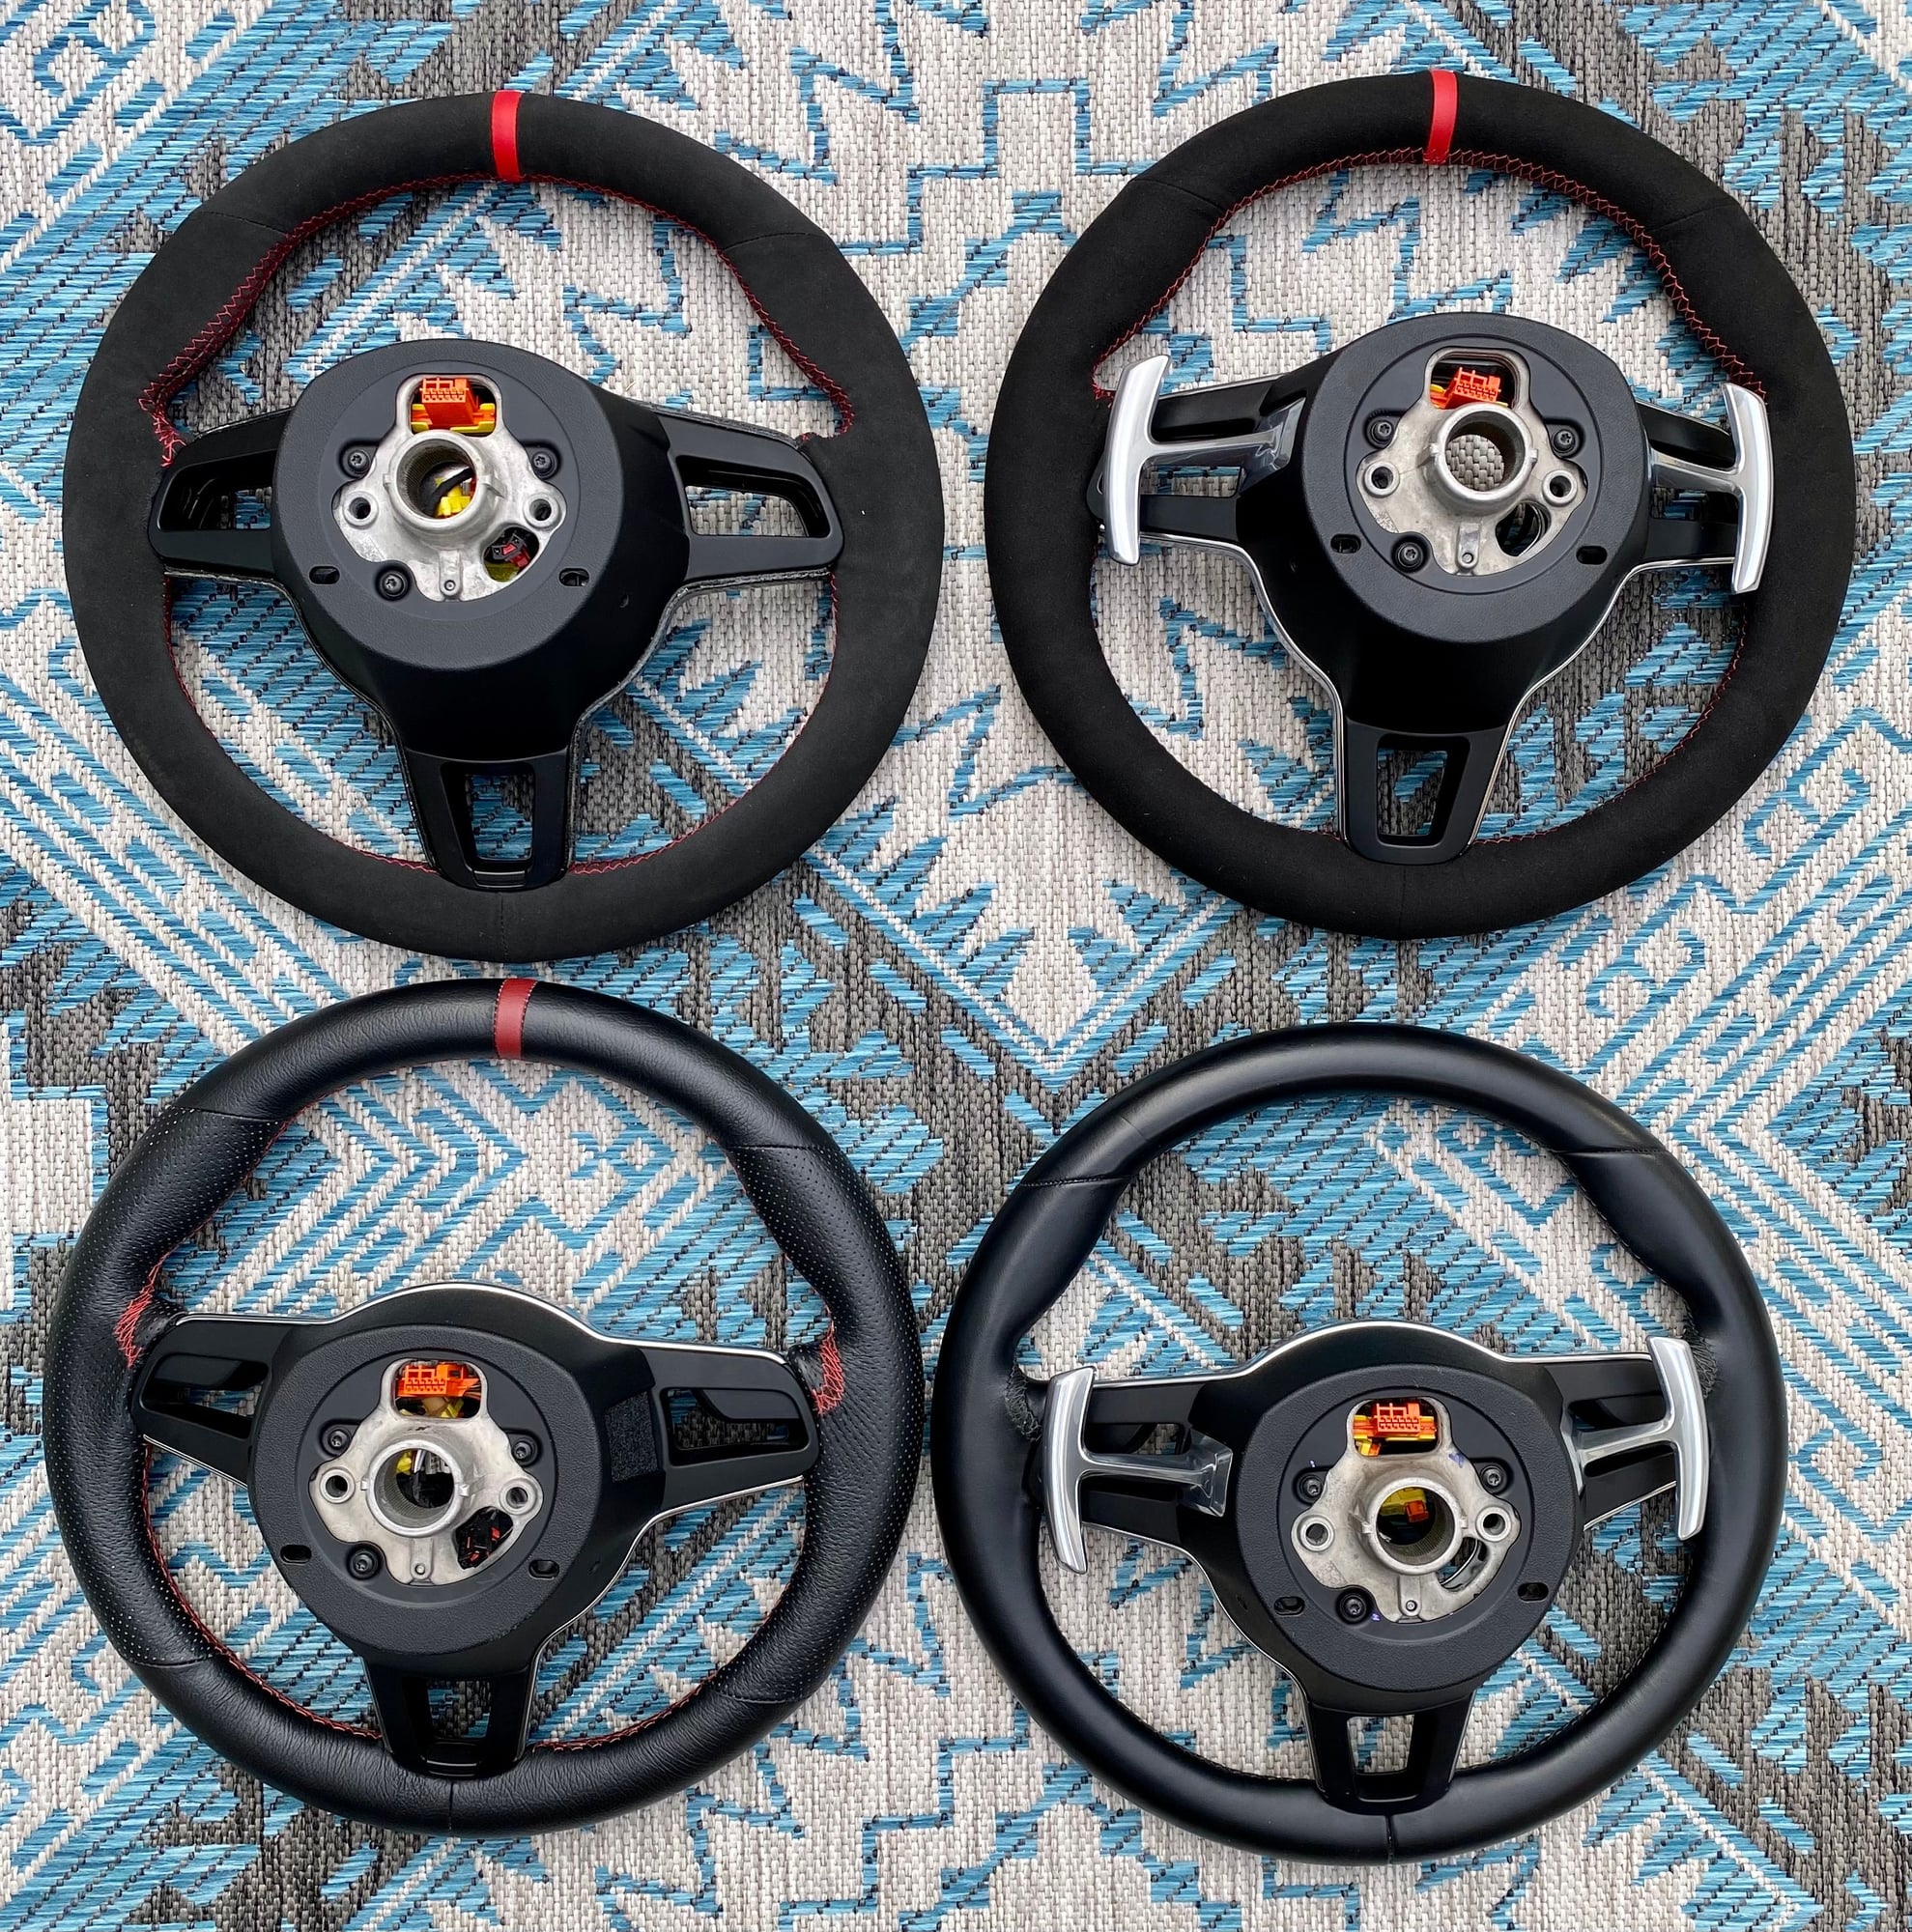 Steering/Suspension - Steering Wheels - Used - All Years Porsche All Models - Niagara Falls, NY 14304, United States